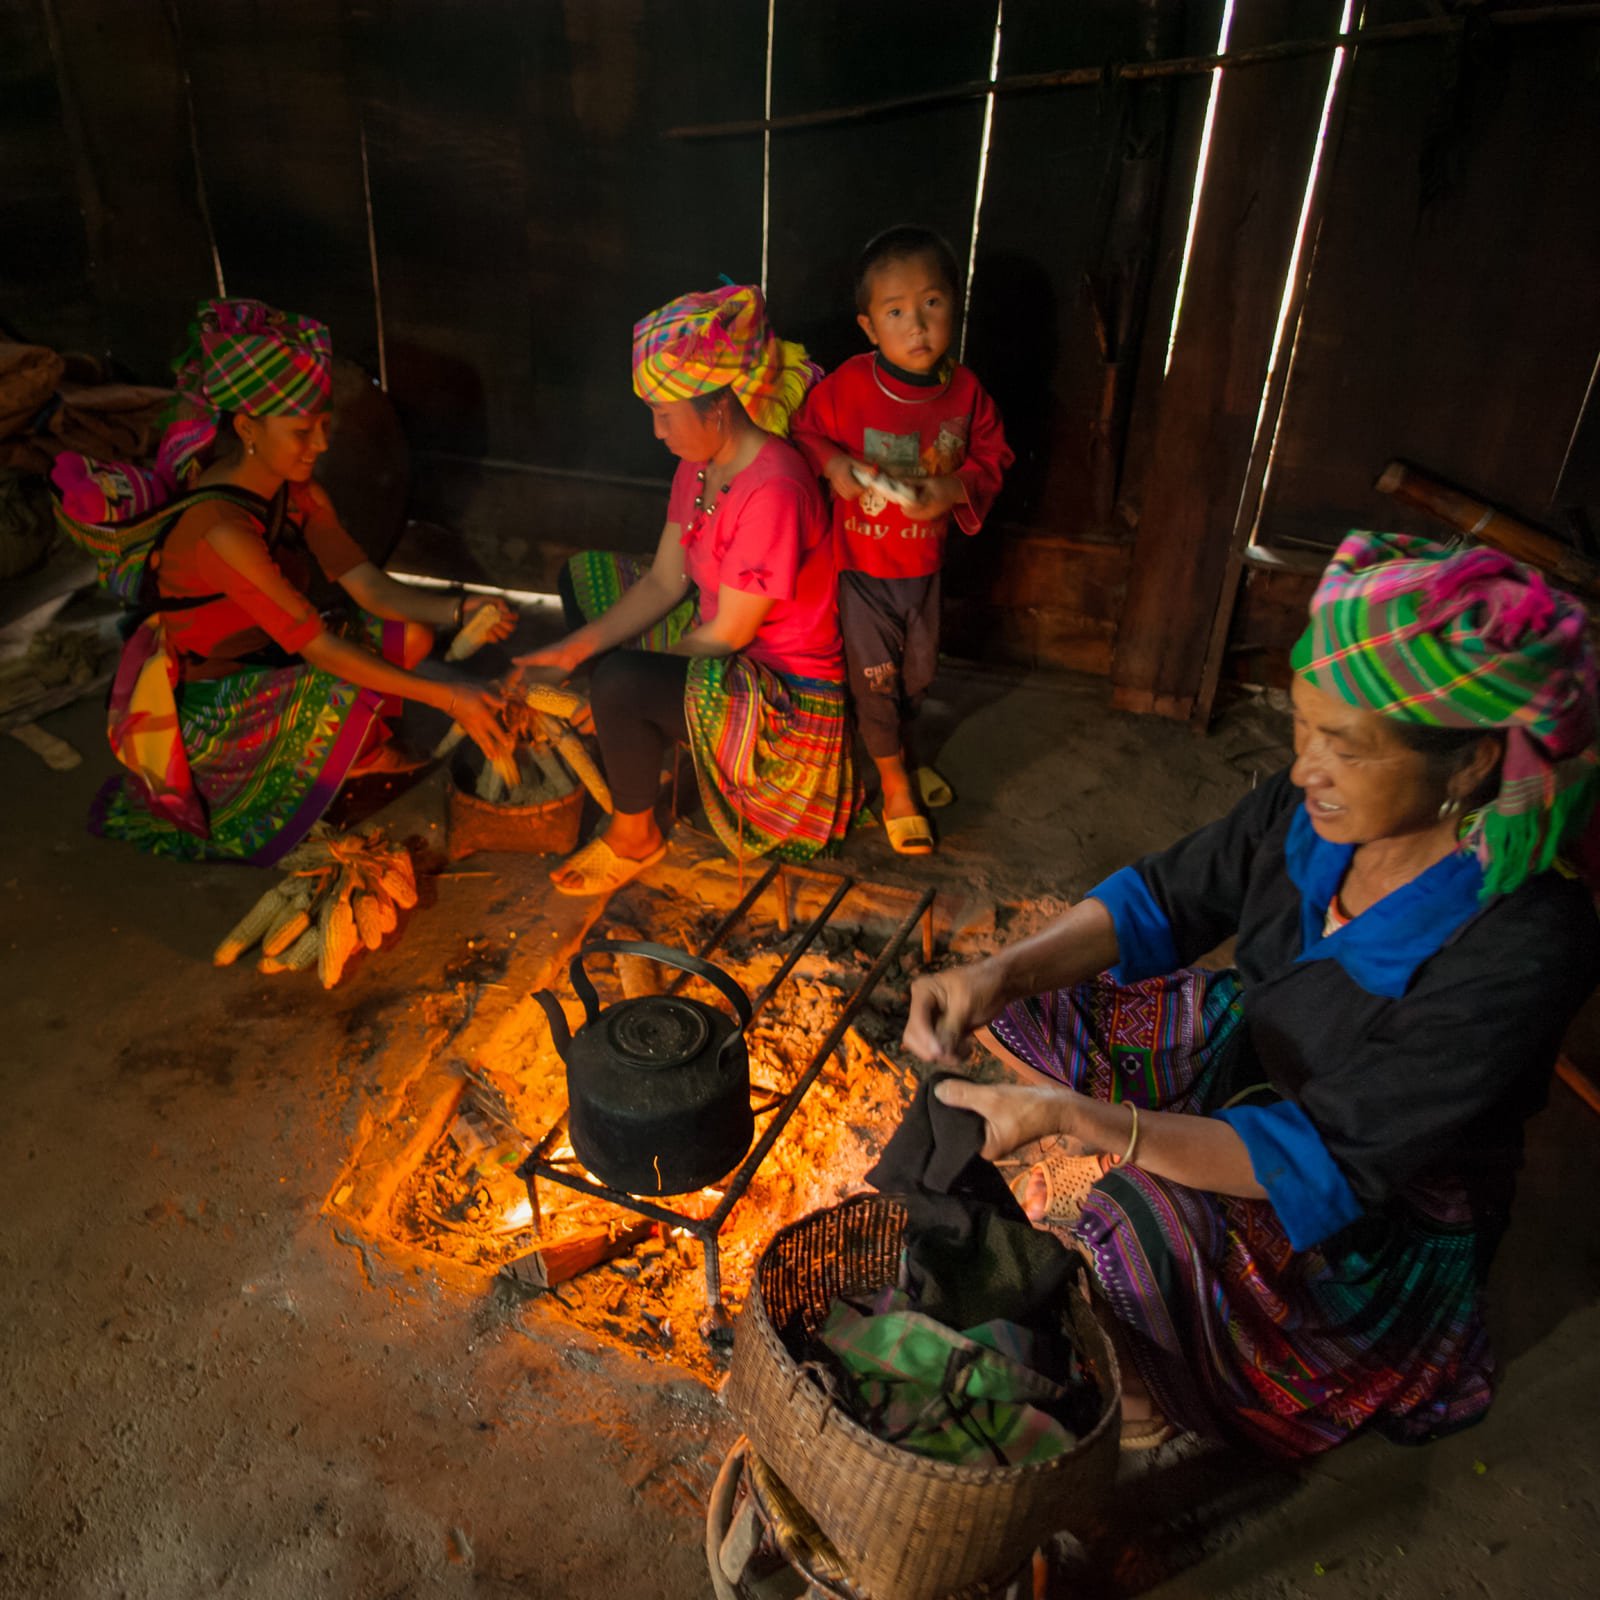 Hmong women carry out their daily responsibilities Vietnam